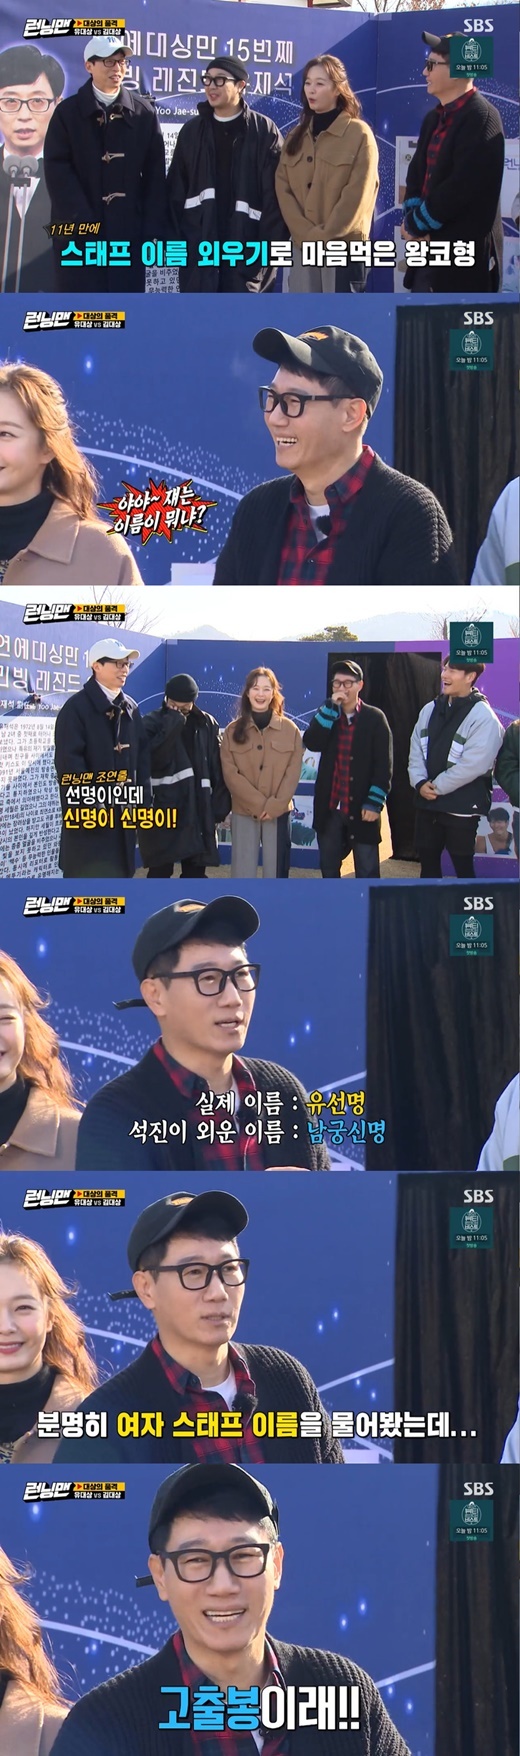 The comedian Yoo Jae-Suk told the Ji Suk-jin anecdote.On SBS Running Man broadcasted on the 21st, Race of the Grand Prize vs Kim Grand Prize was held.At the opening ceremony, Yoo Jae-Suk pointed to Ji Suk-jin and said, Seats with brother now I am memorized by Staff Name.He said, Whats Name? Its a good name, but I said New name.Ji Suk-jin said, I was passing by and asked, What is his name?It was definitely a woman Staff, he said, I was a high school, and Lee Kwang-soo laughed, No one tells my brother his name. Yoo Jae-Suk then laughed, saying, Staff, all of a sudden, Seats with brother, do not think strange even if you call it a strange name.